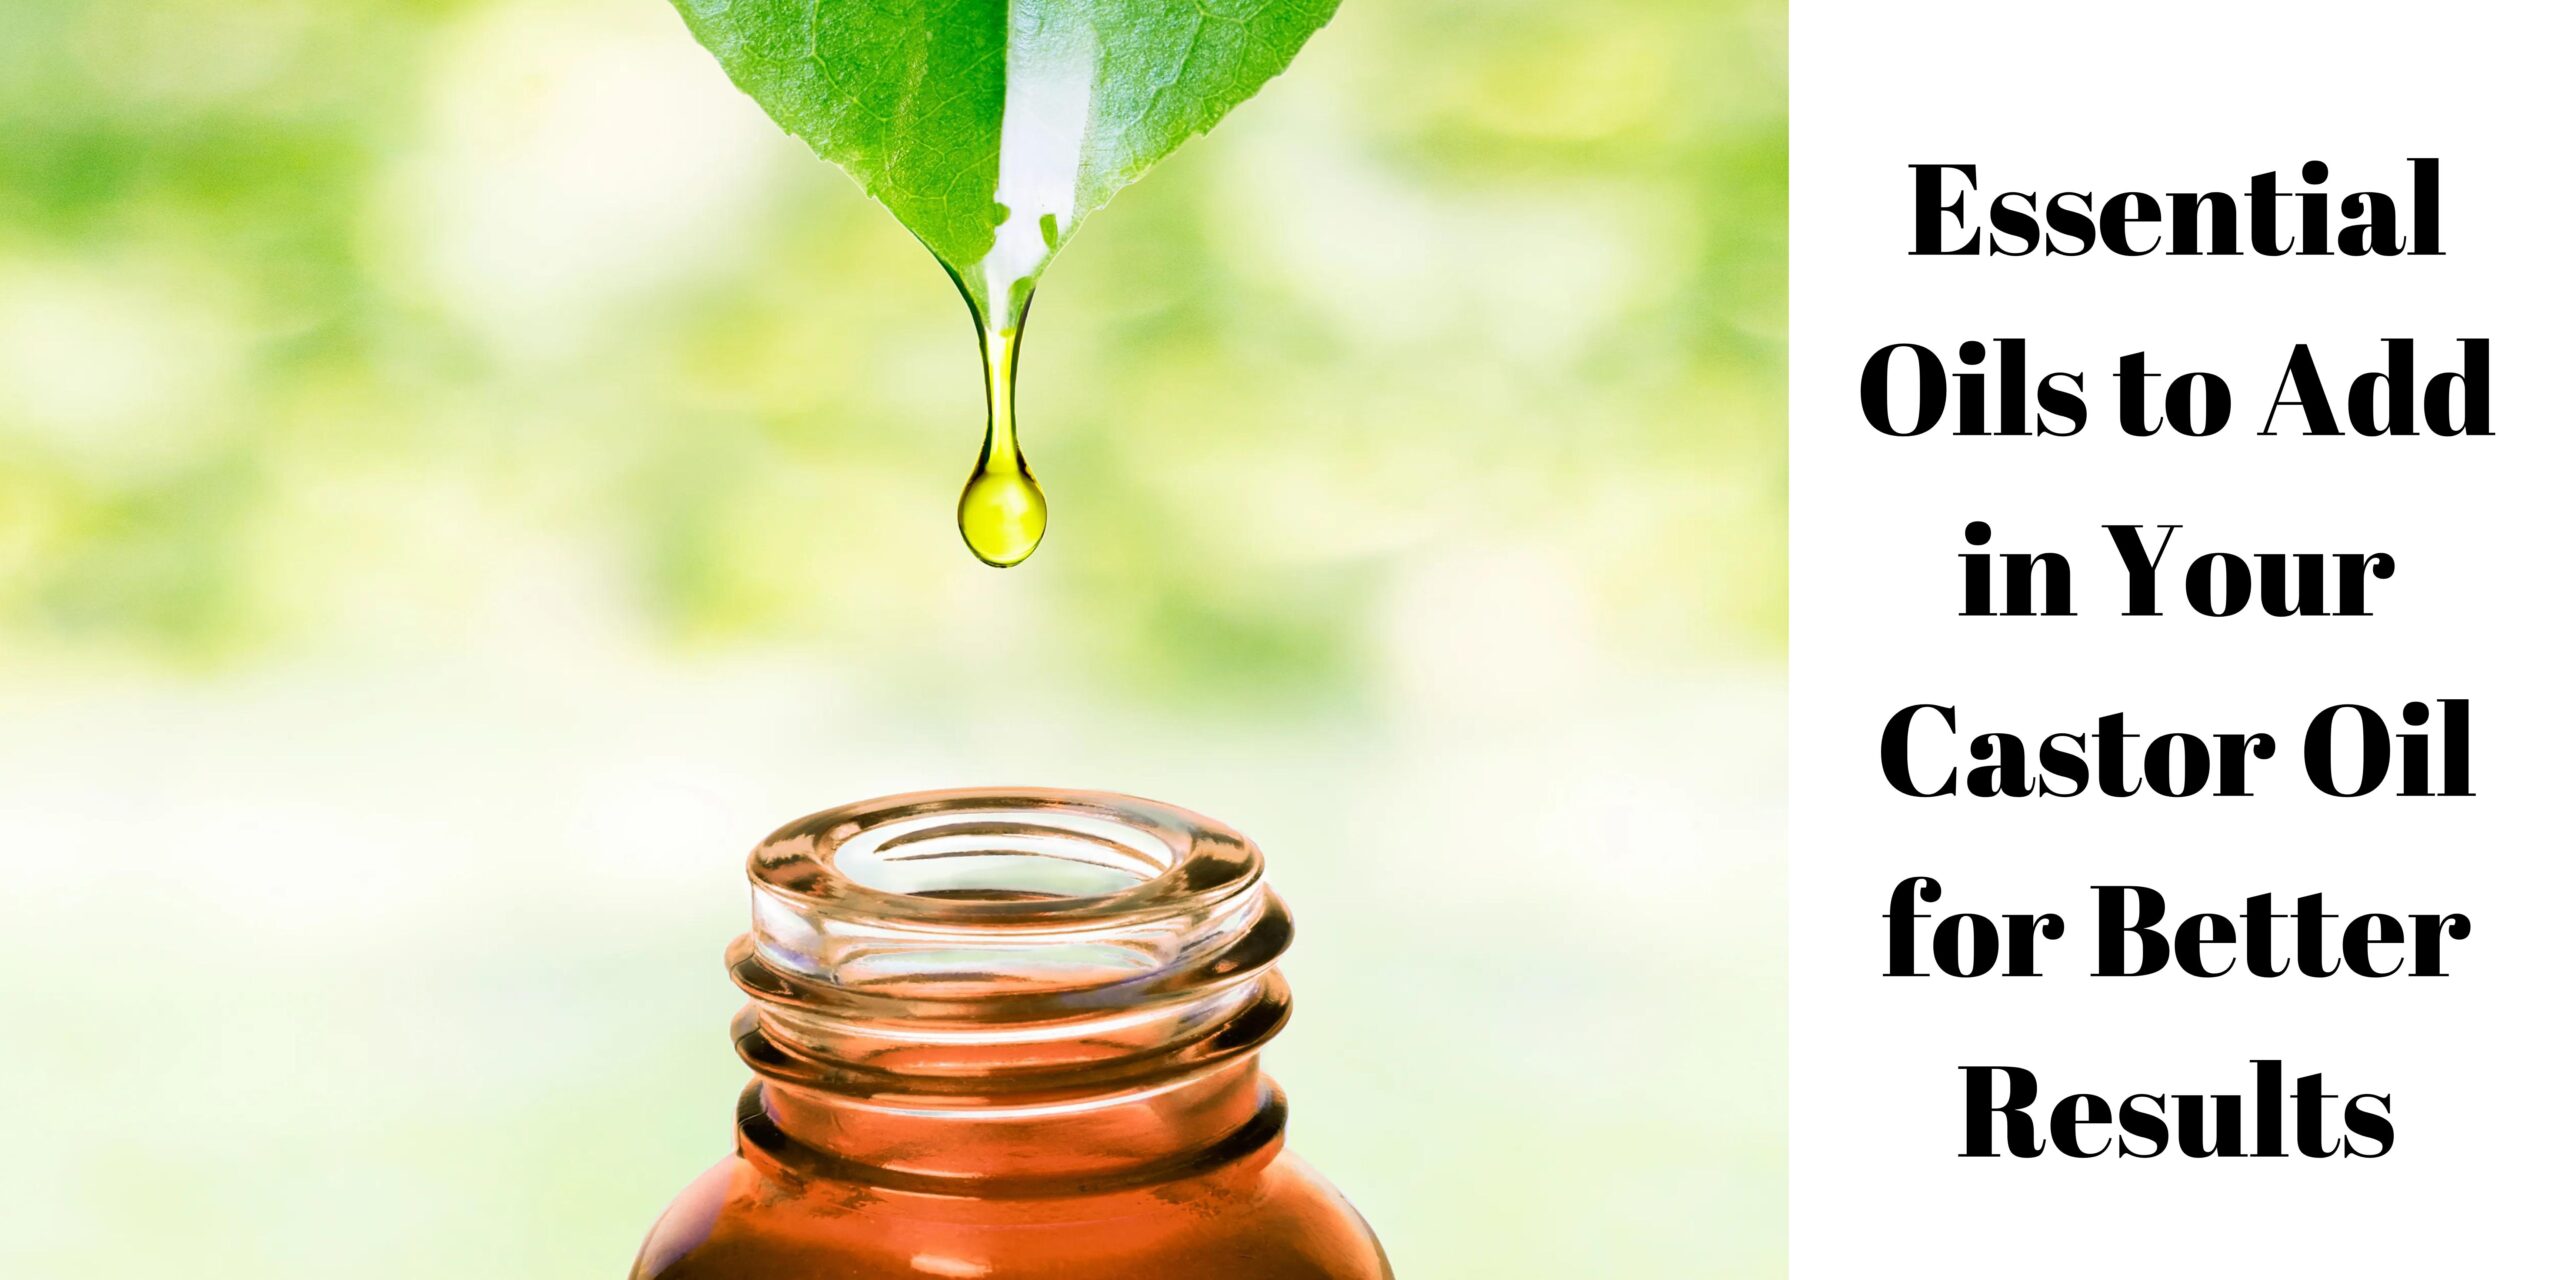 Essential Oils To Add In Your Castor Oil For Better Results